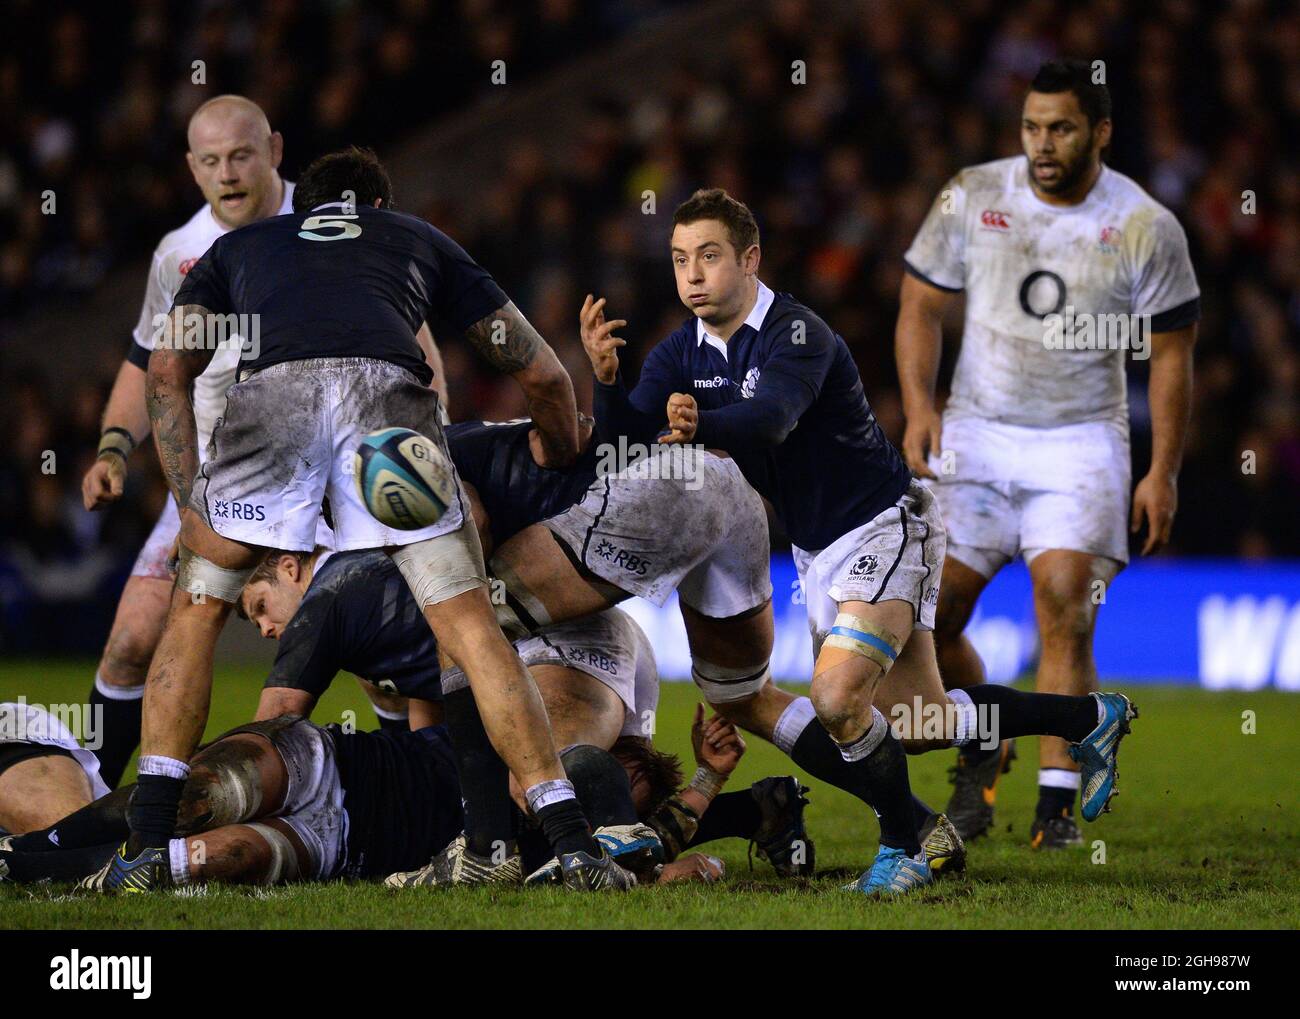 Greig Laidlaw of Scotland in action during the RBS 6Nations match between Scotland and England at Murrayfield Stadium, Edinburgh on February 8, 2014. Stock Photo